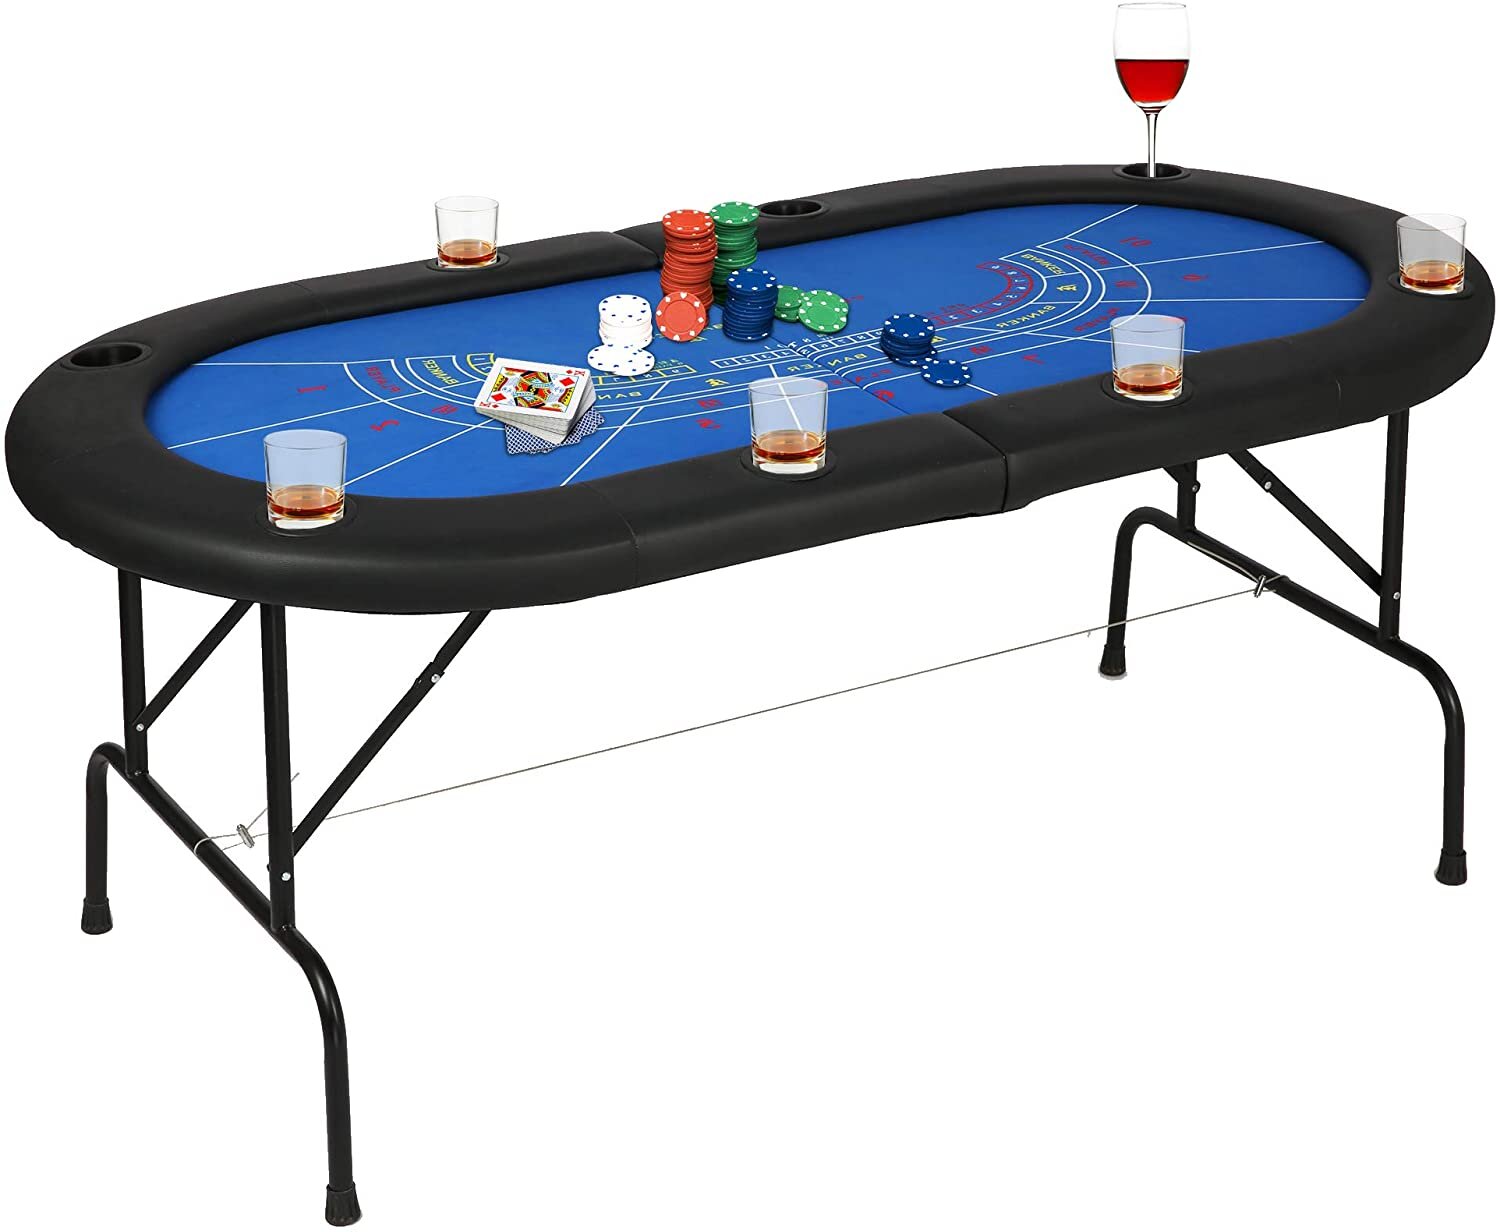 Poker Table 10 Player Texas Holdem Game Tables Folding Portable With Cup Holders 